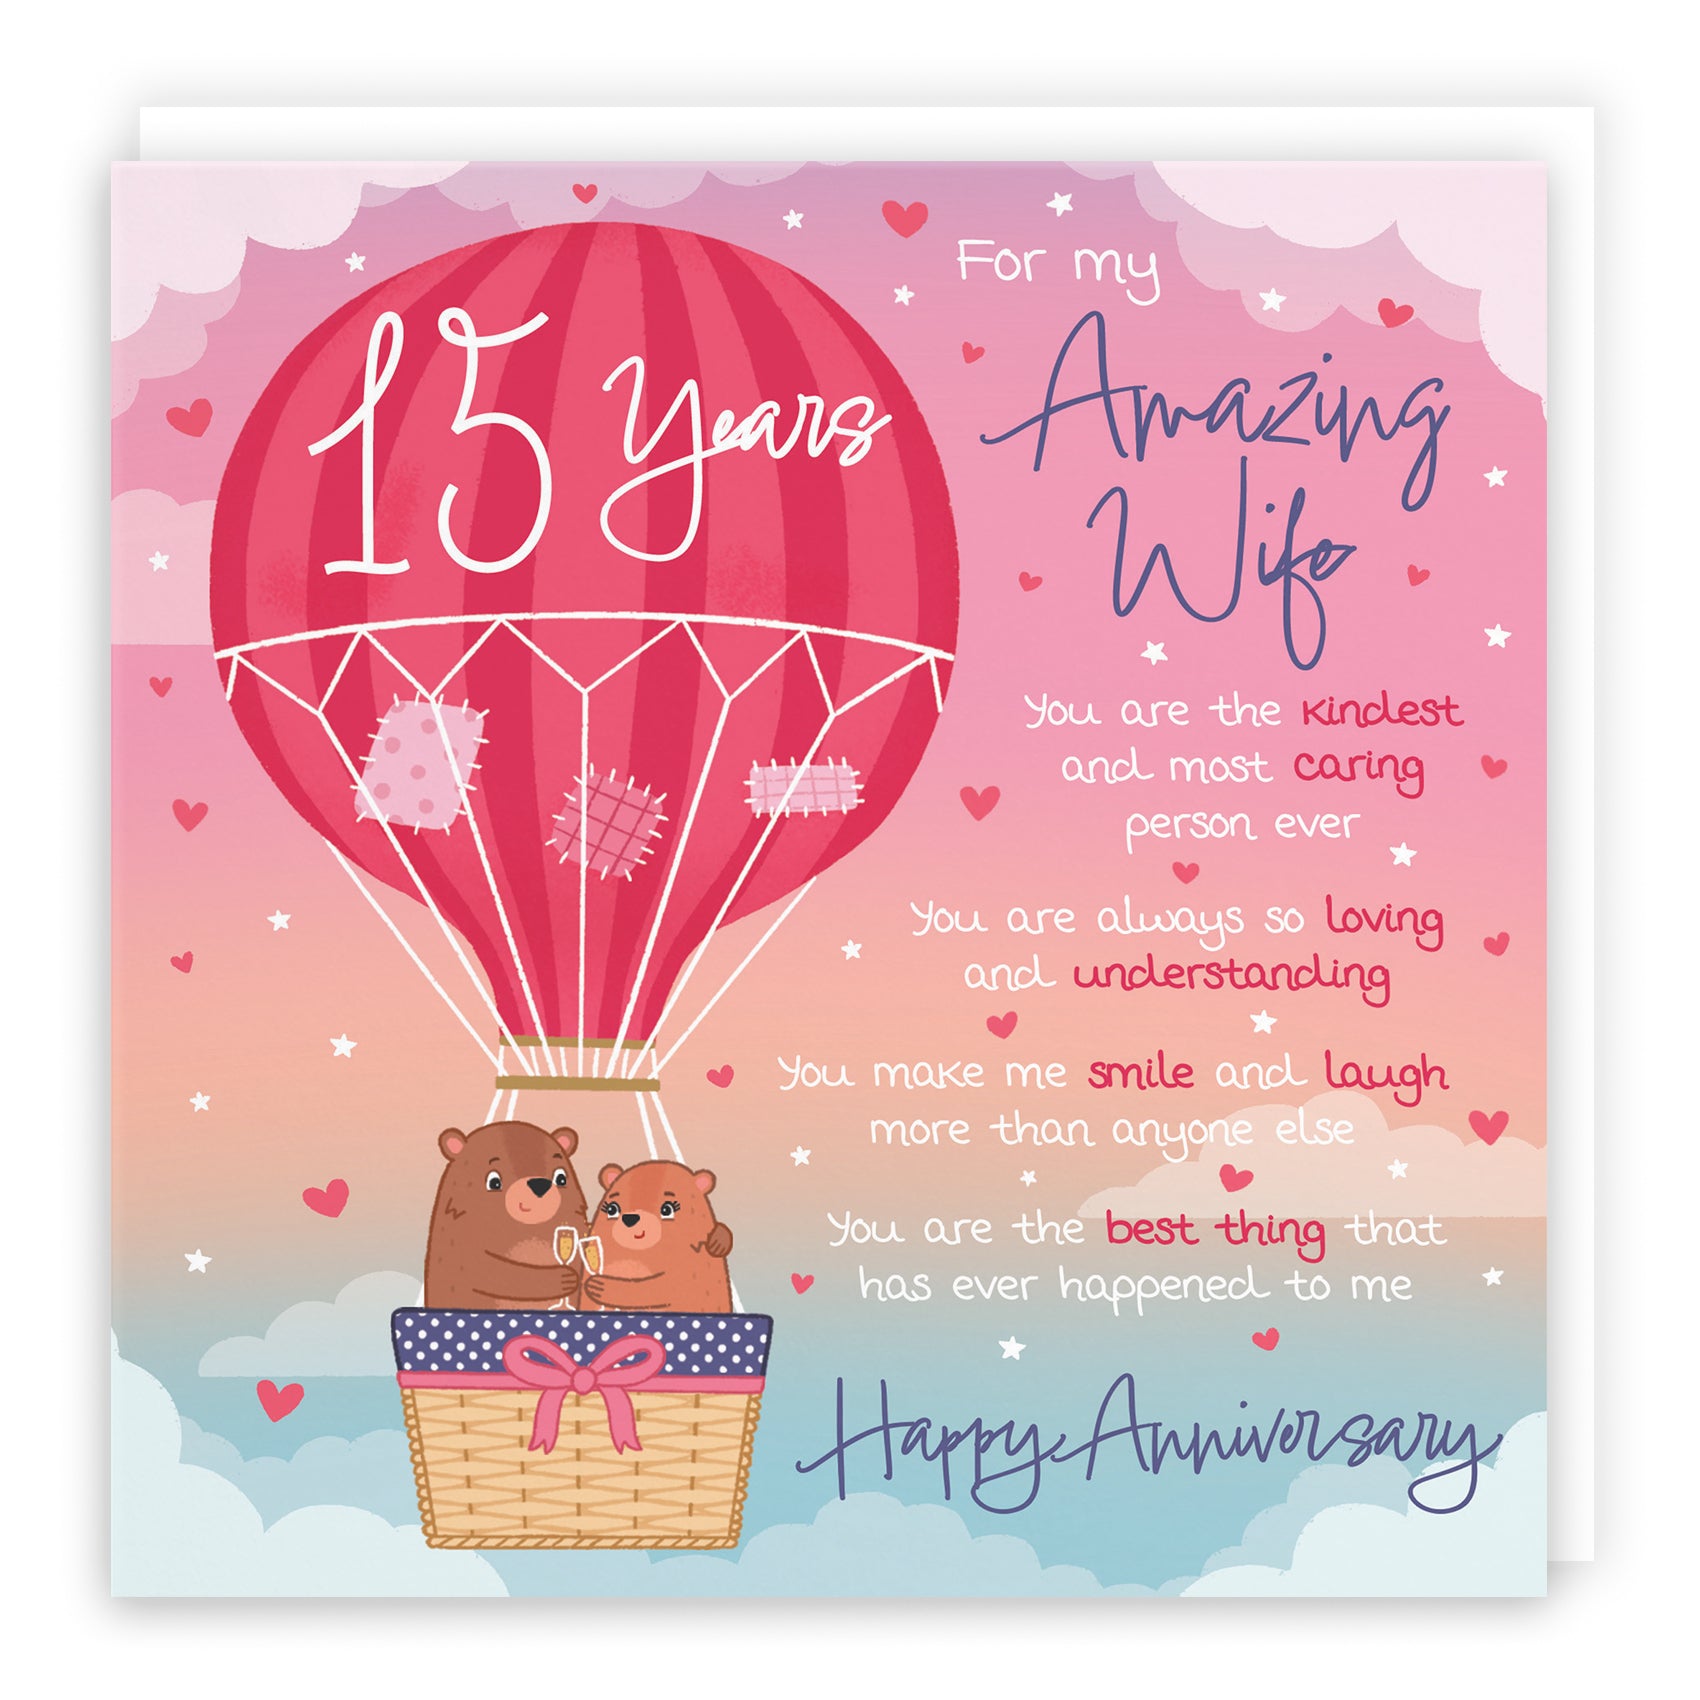 Wife 15th Anniversary Poem Card Love Is In The Air Cute Bears